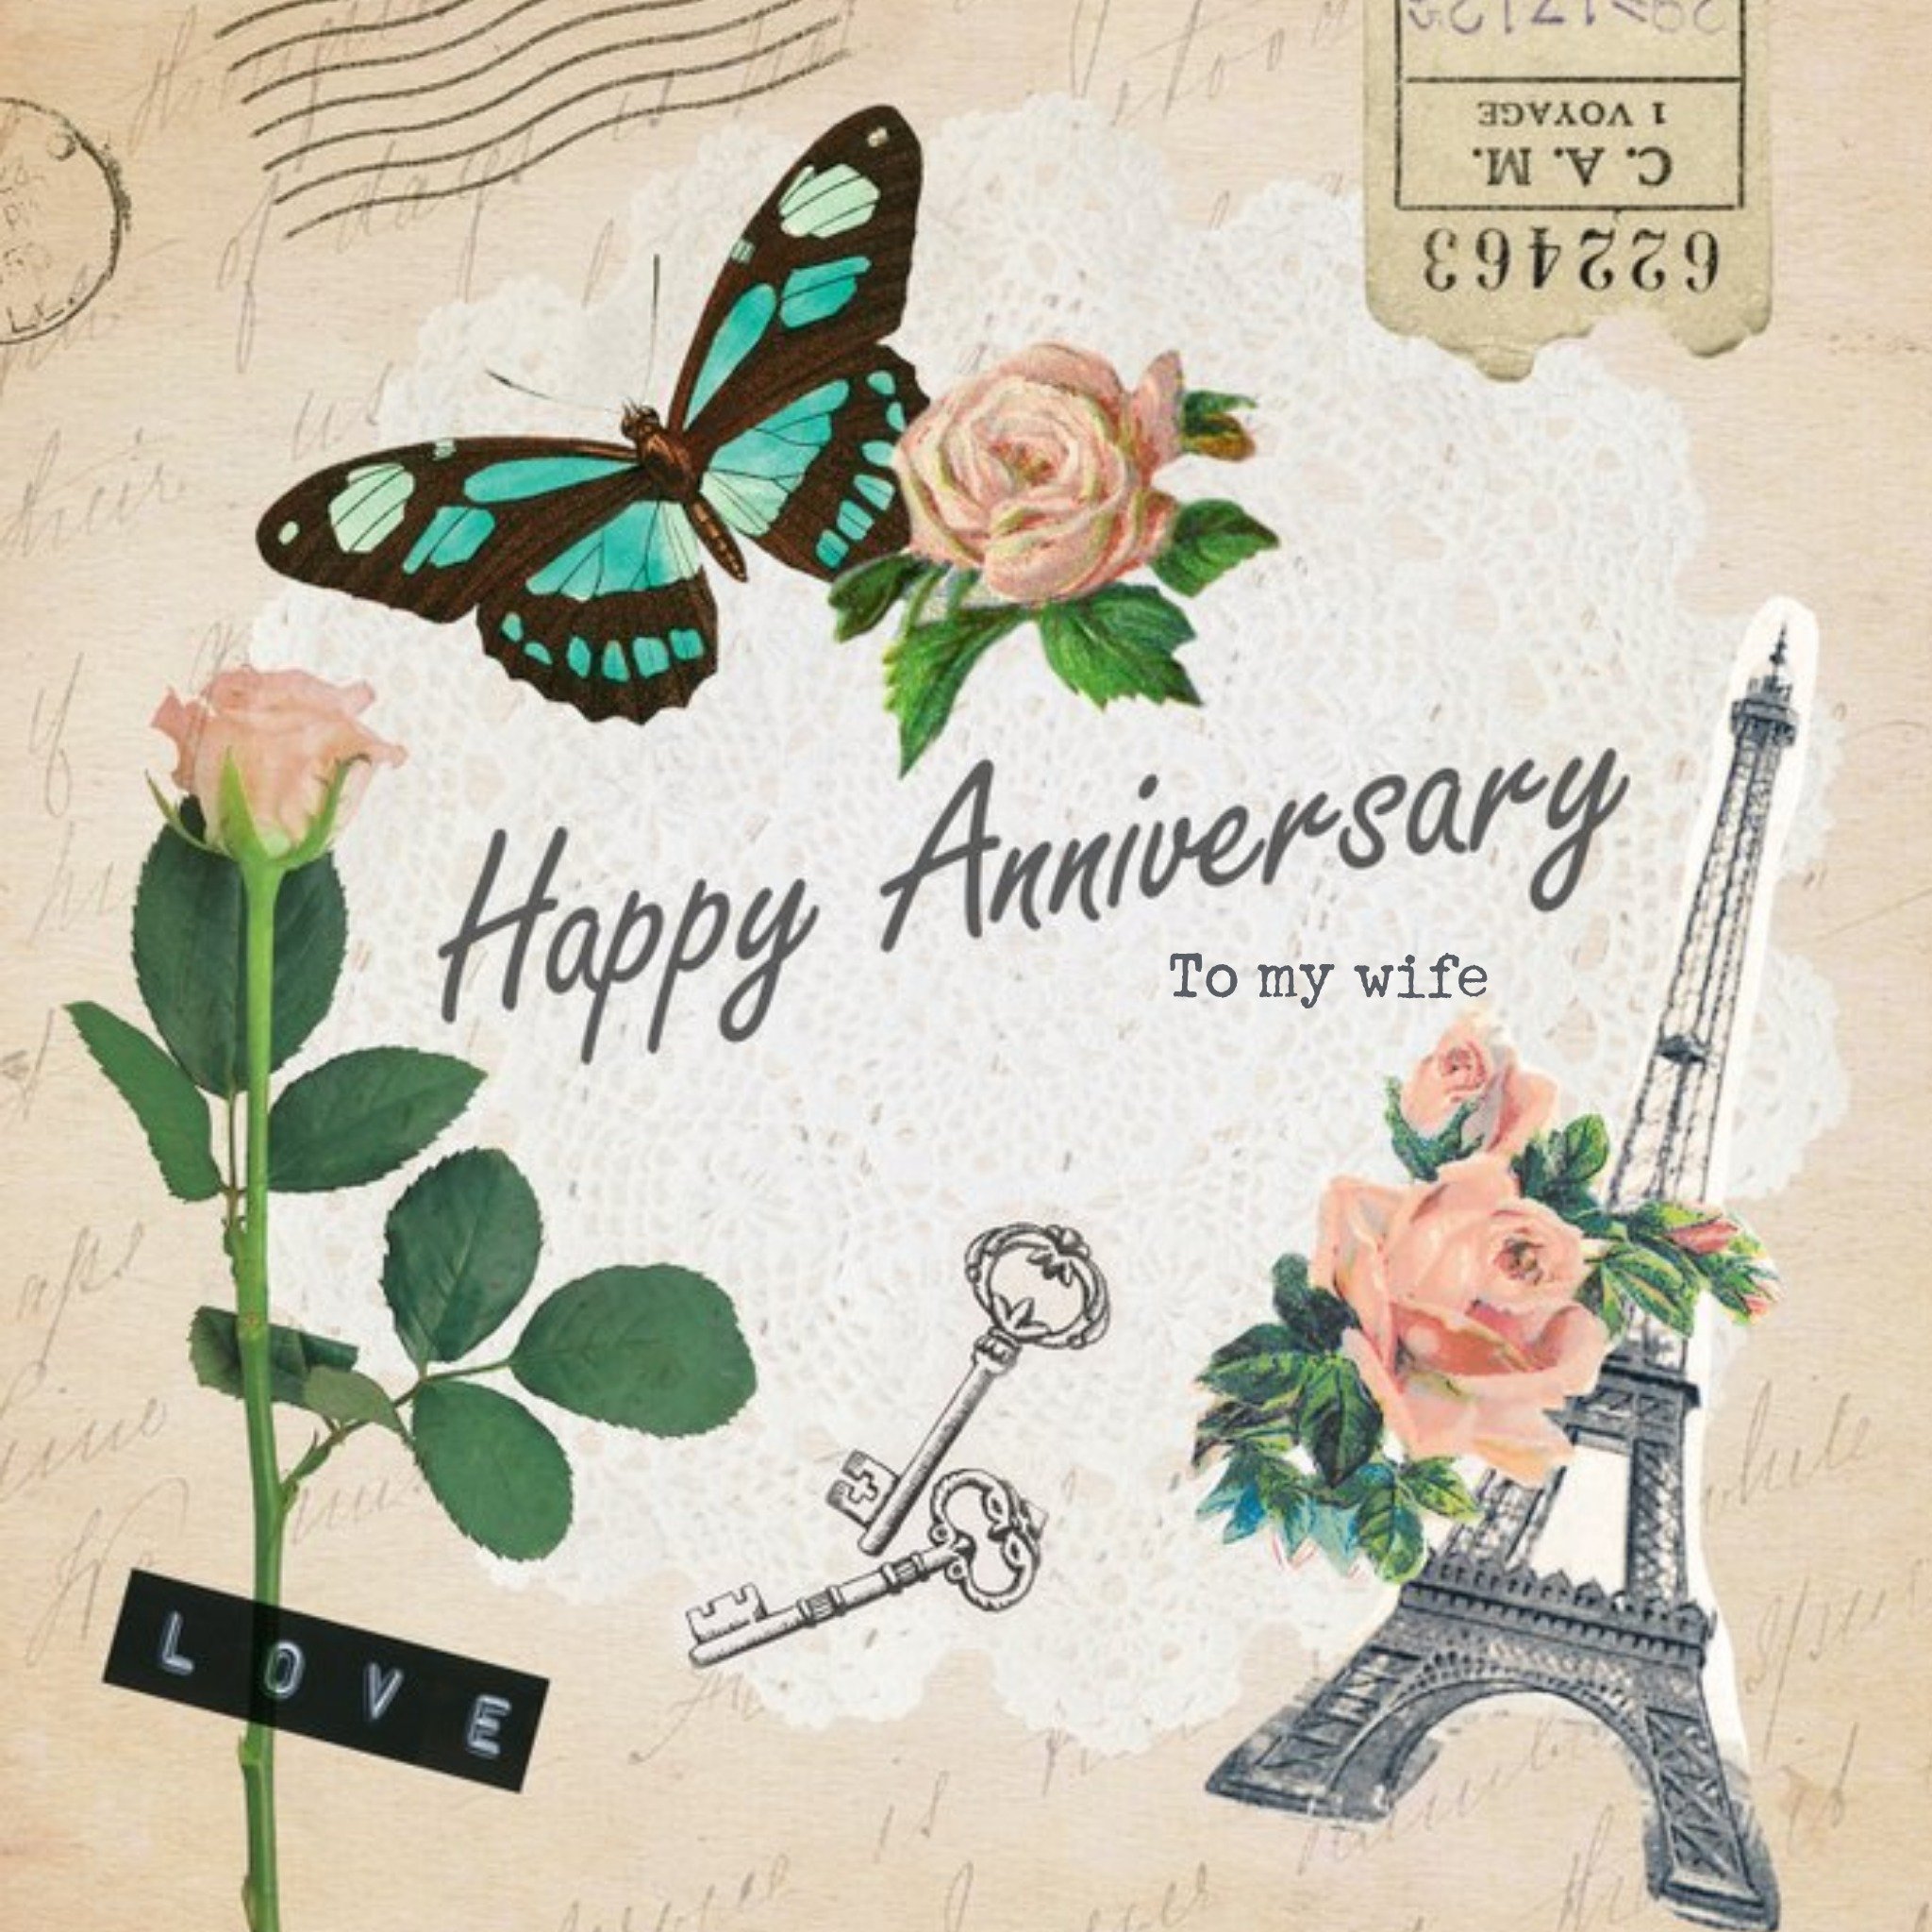 Moonpig Vintage Paris And Roses Anniversary Card For Wife, Square